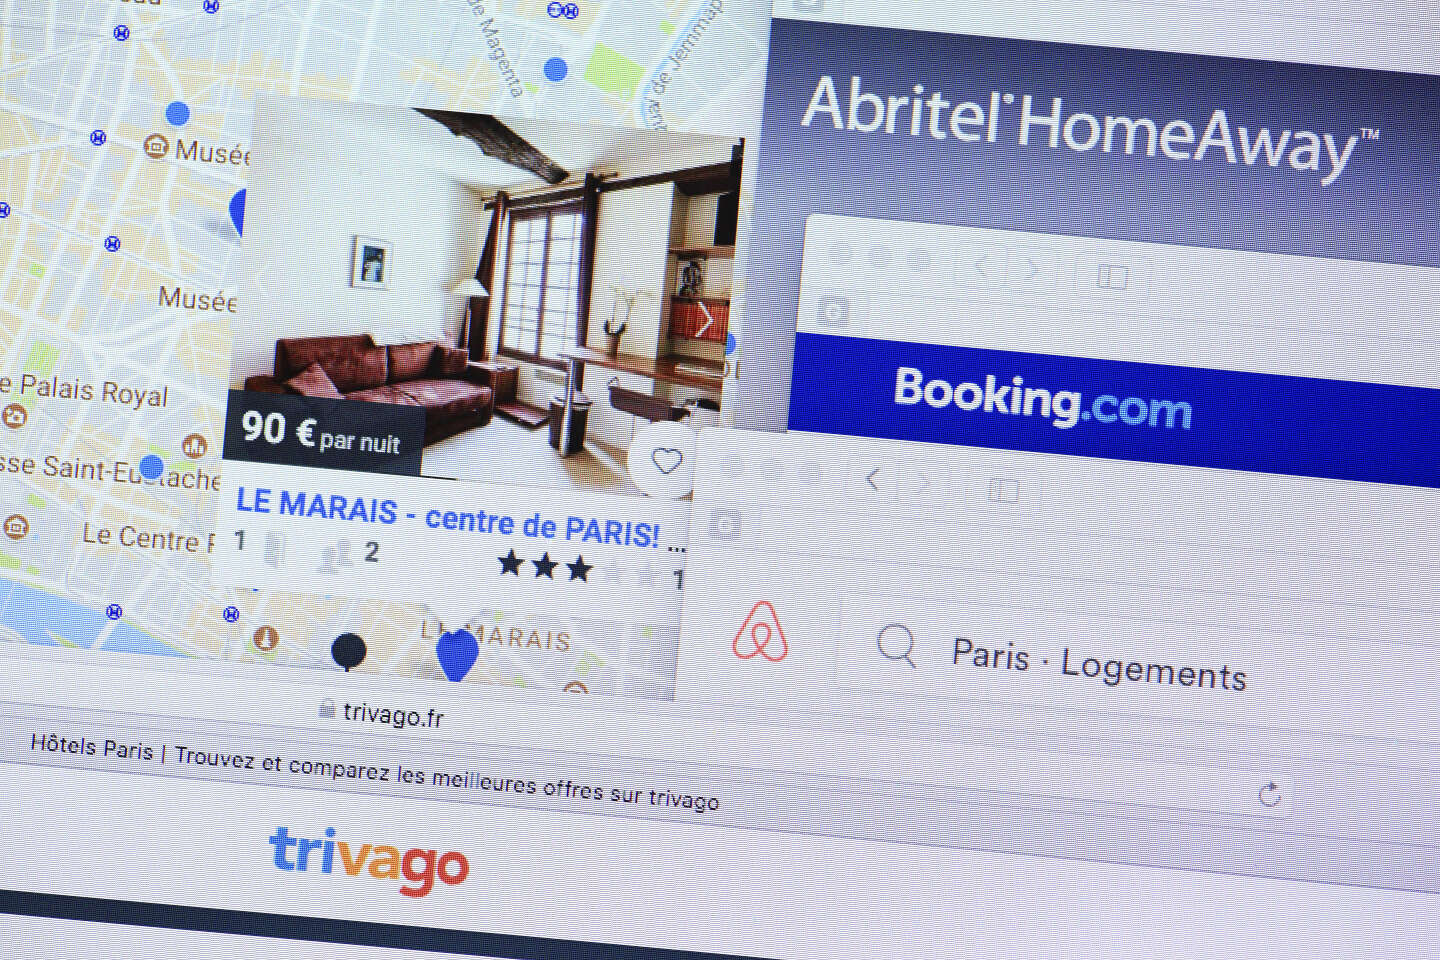 Airbnb and Abritel held responsible for their content